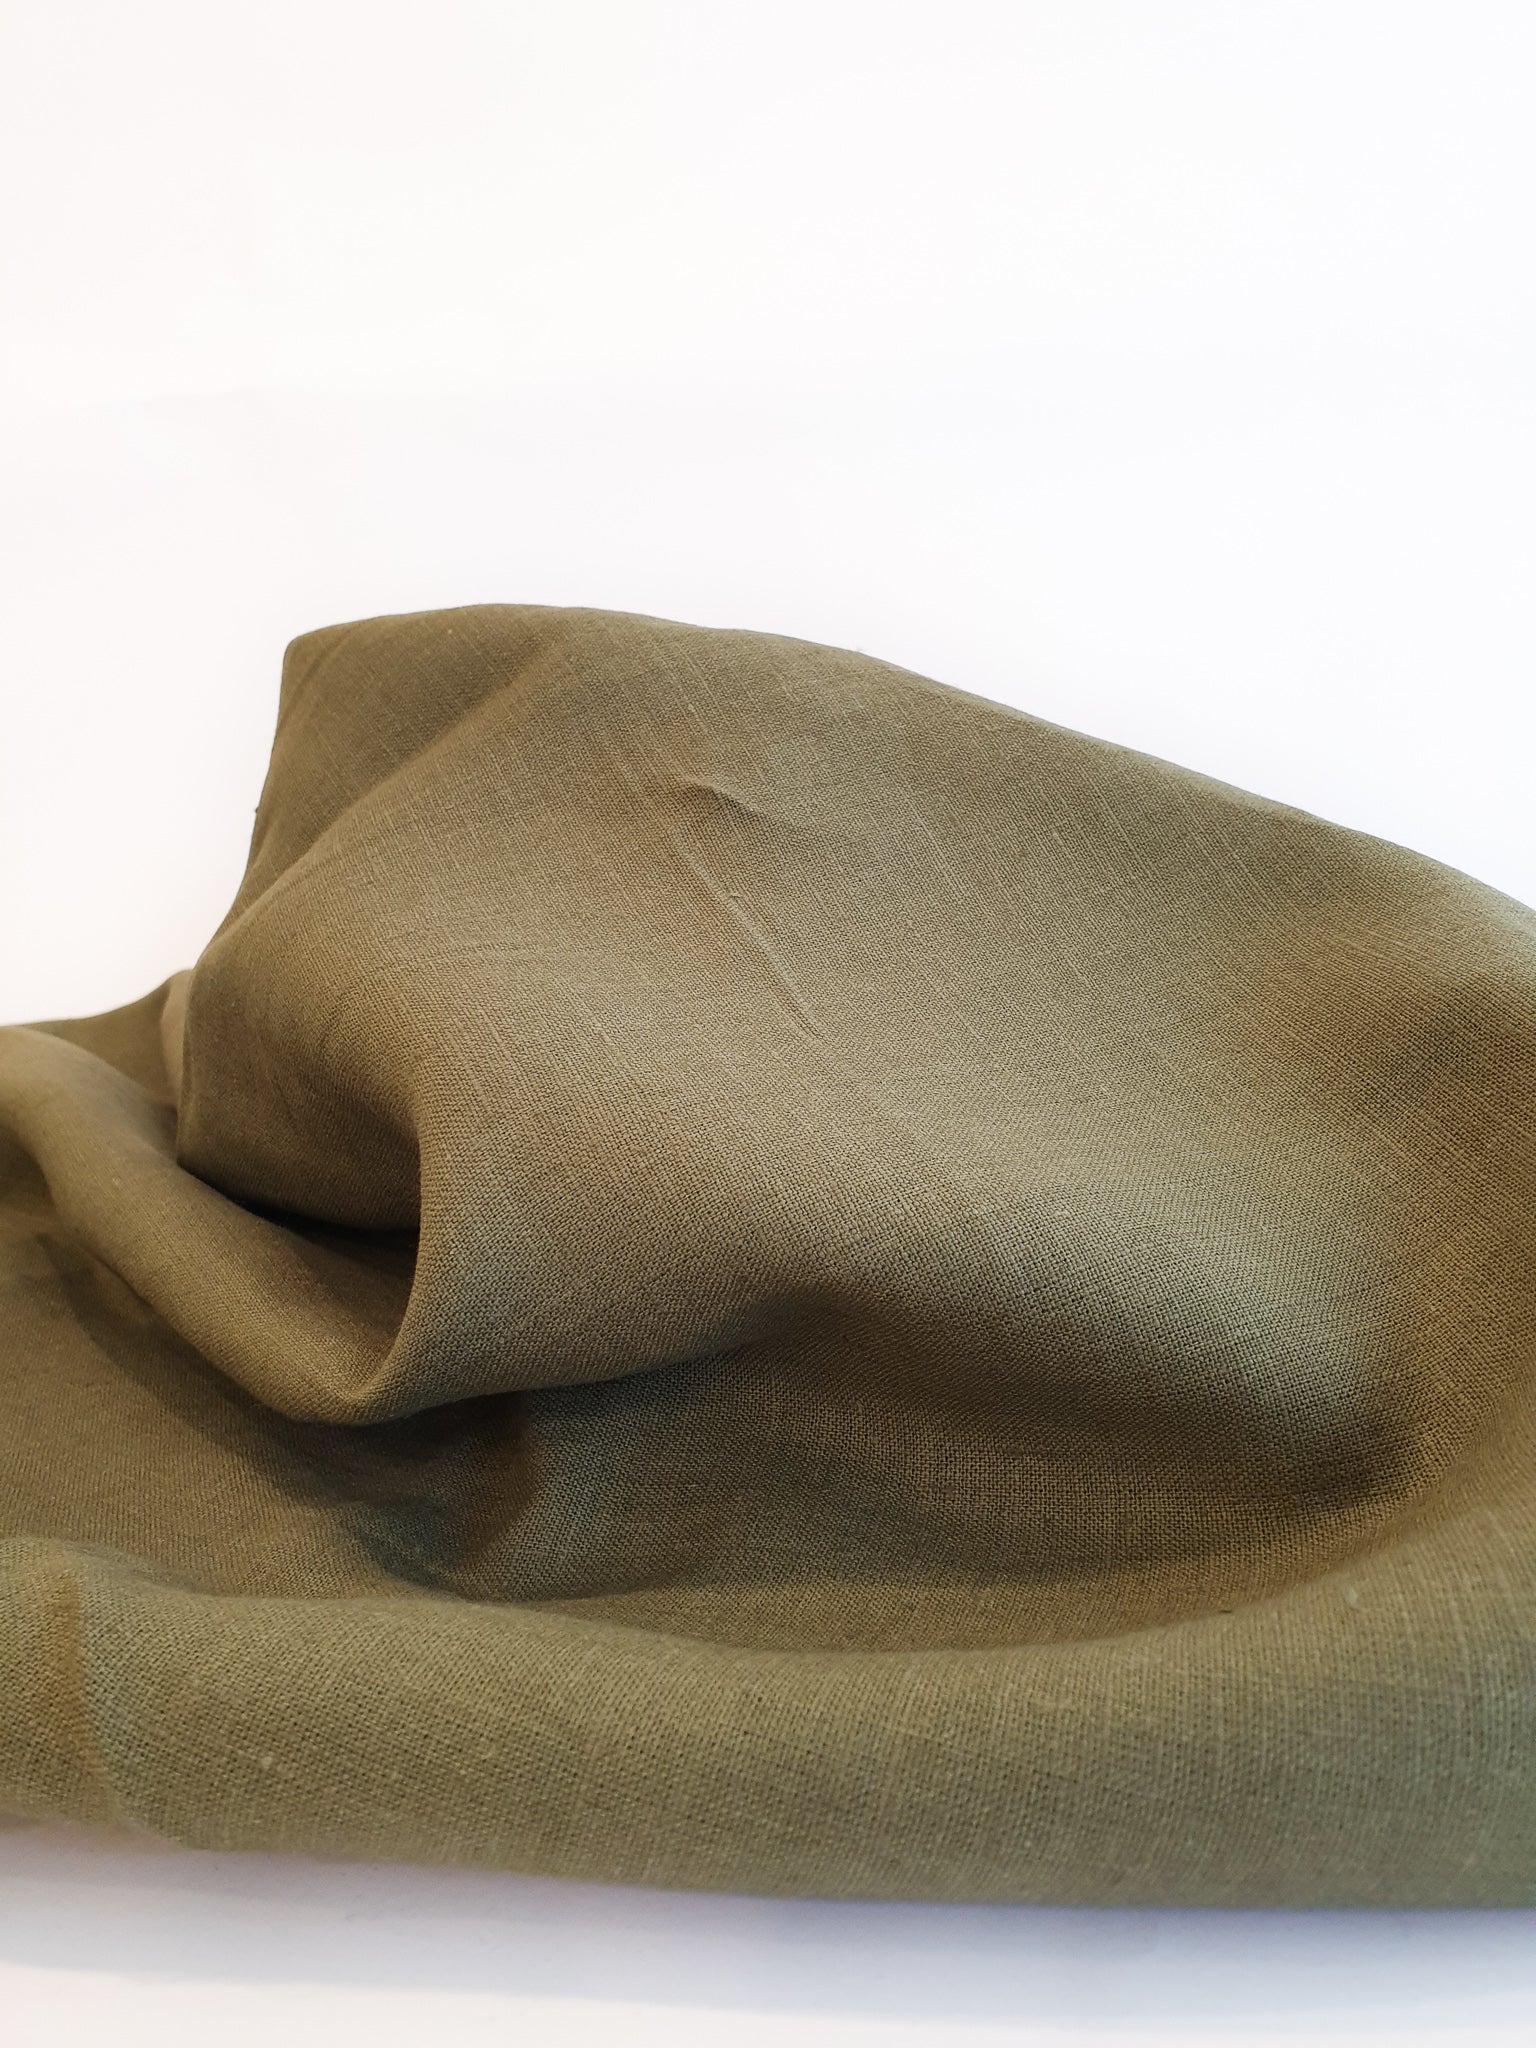 No. 387 linen fabric olive green